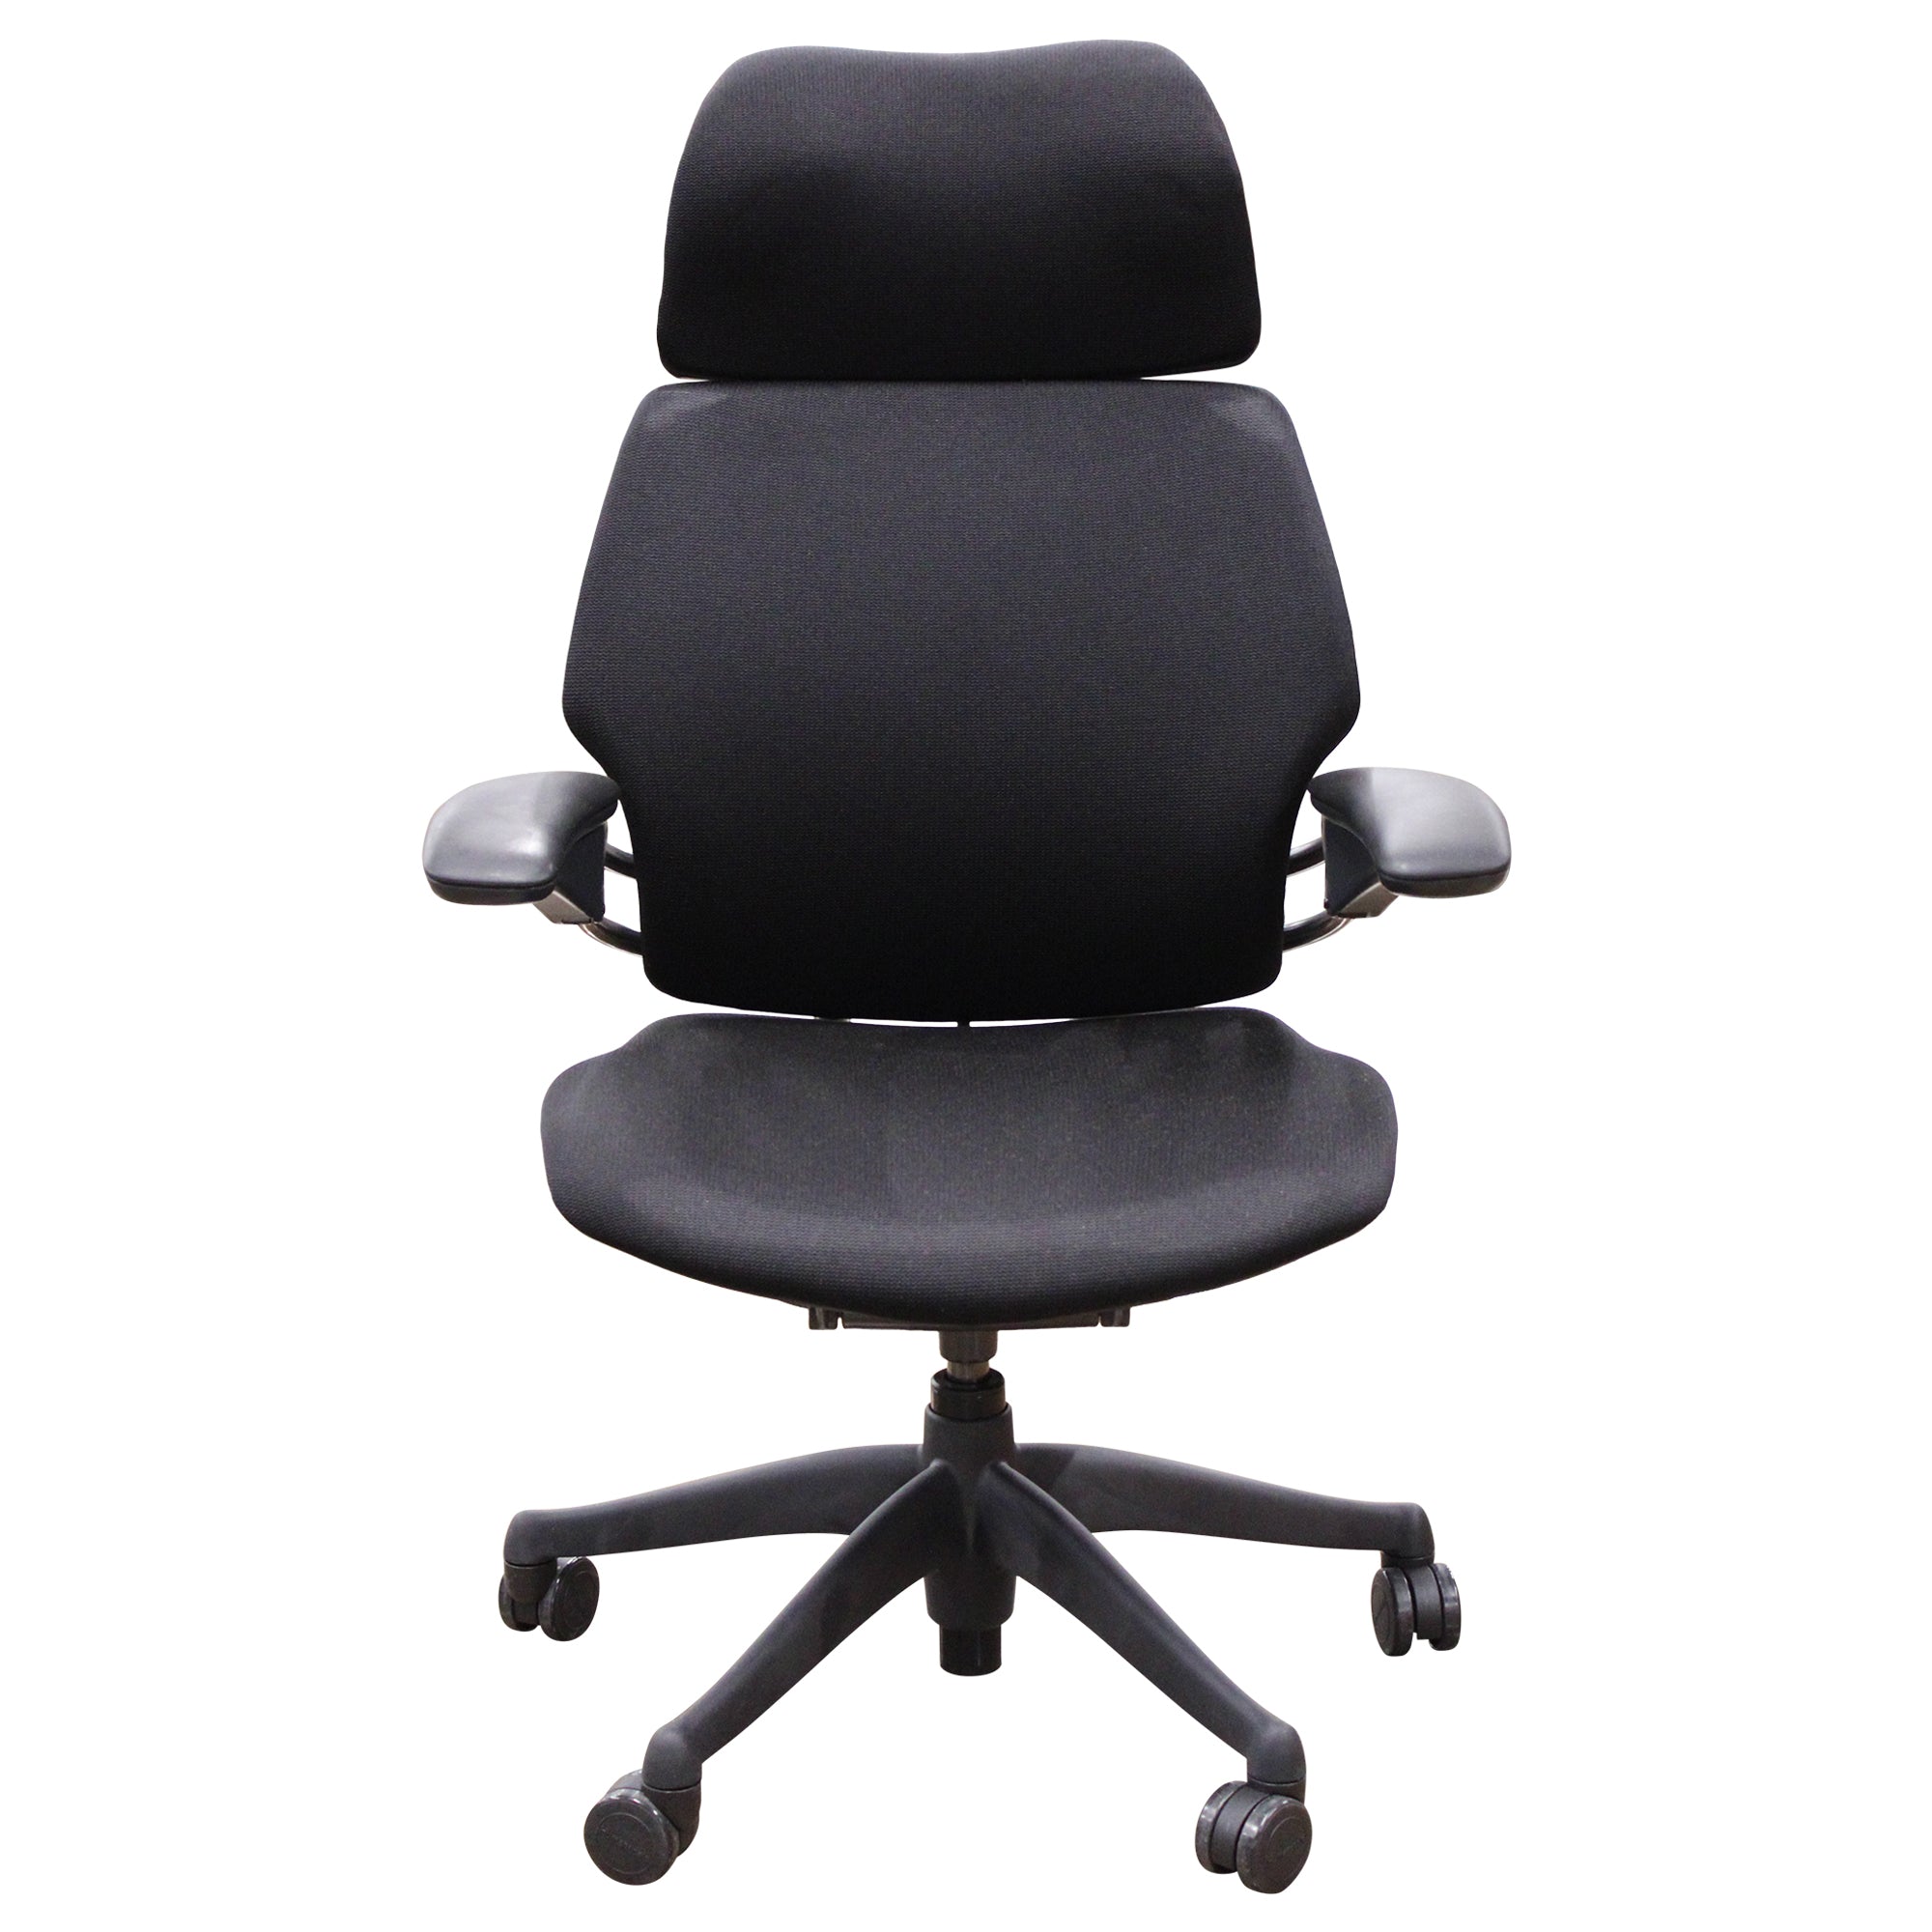 Humanscale Freedom Task Chair with Headrest, Black - New CLOSEOUT